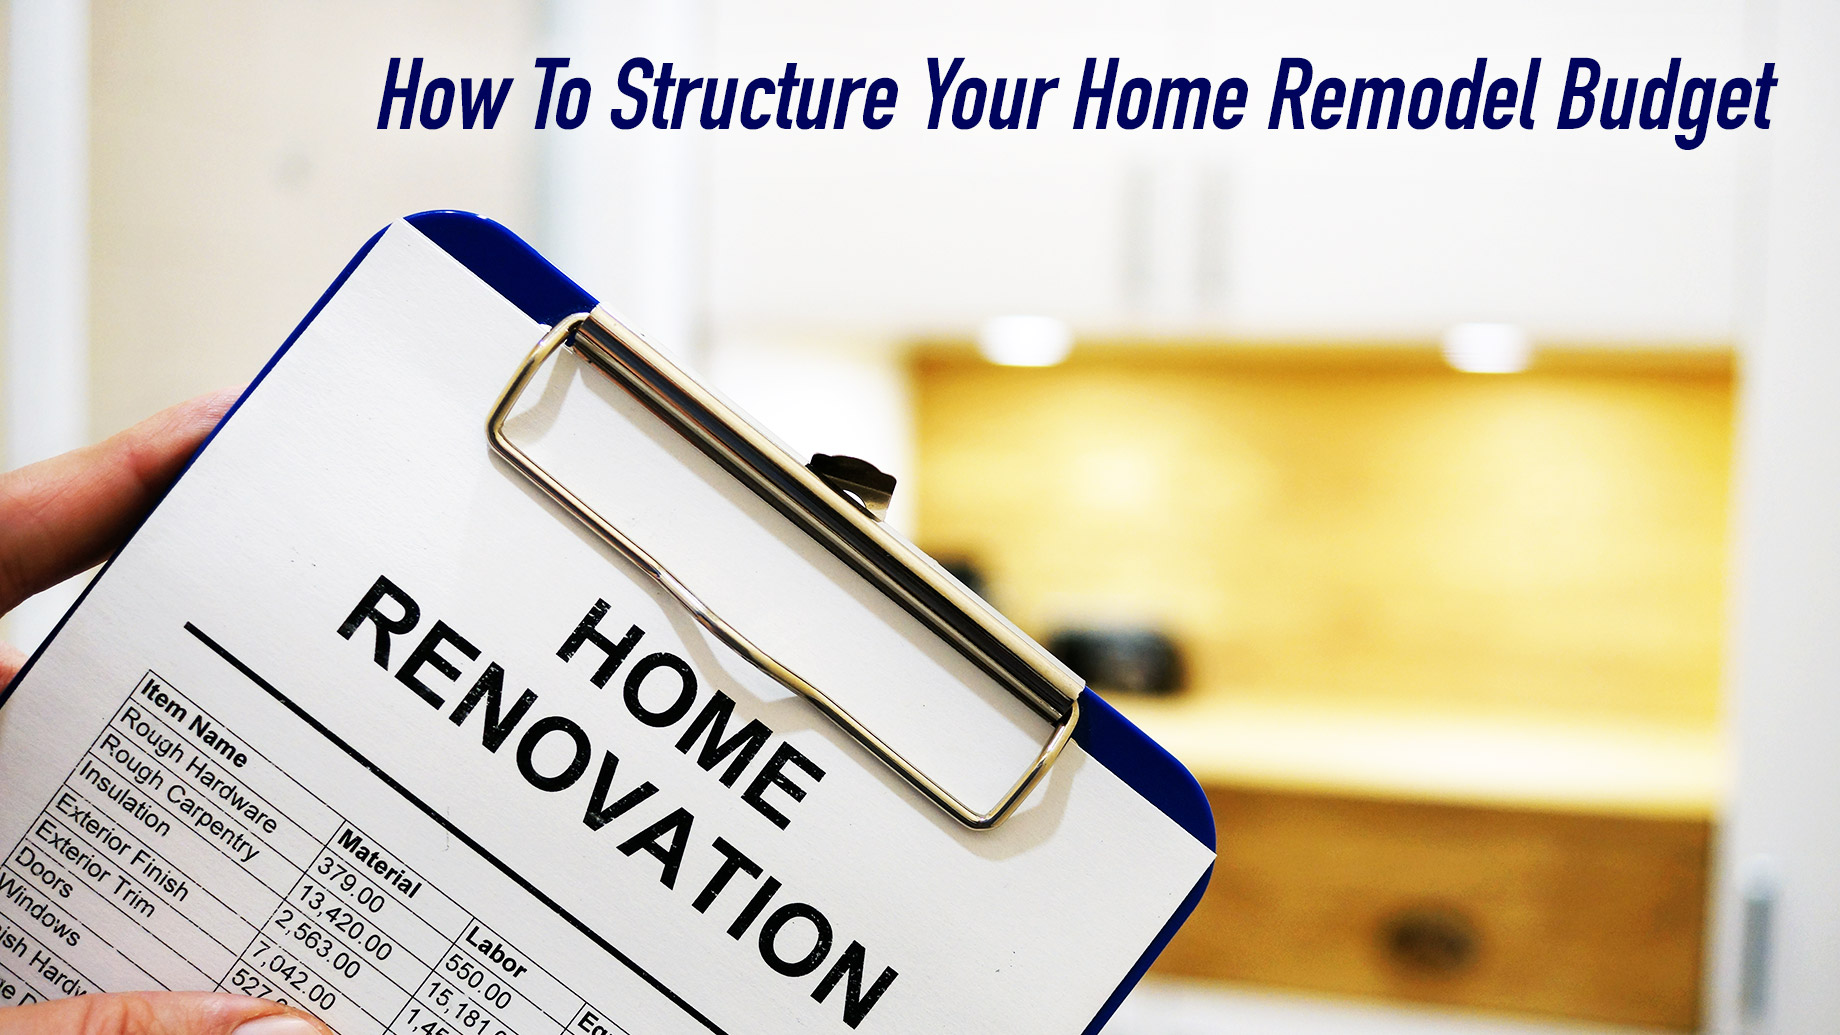 How To Structure Your Home Remodel Budget